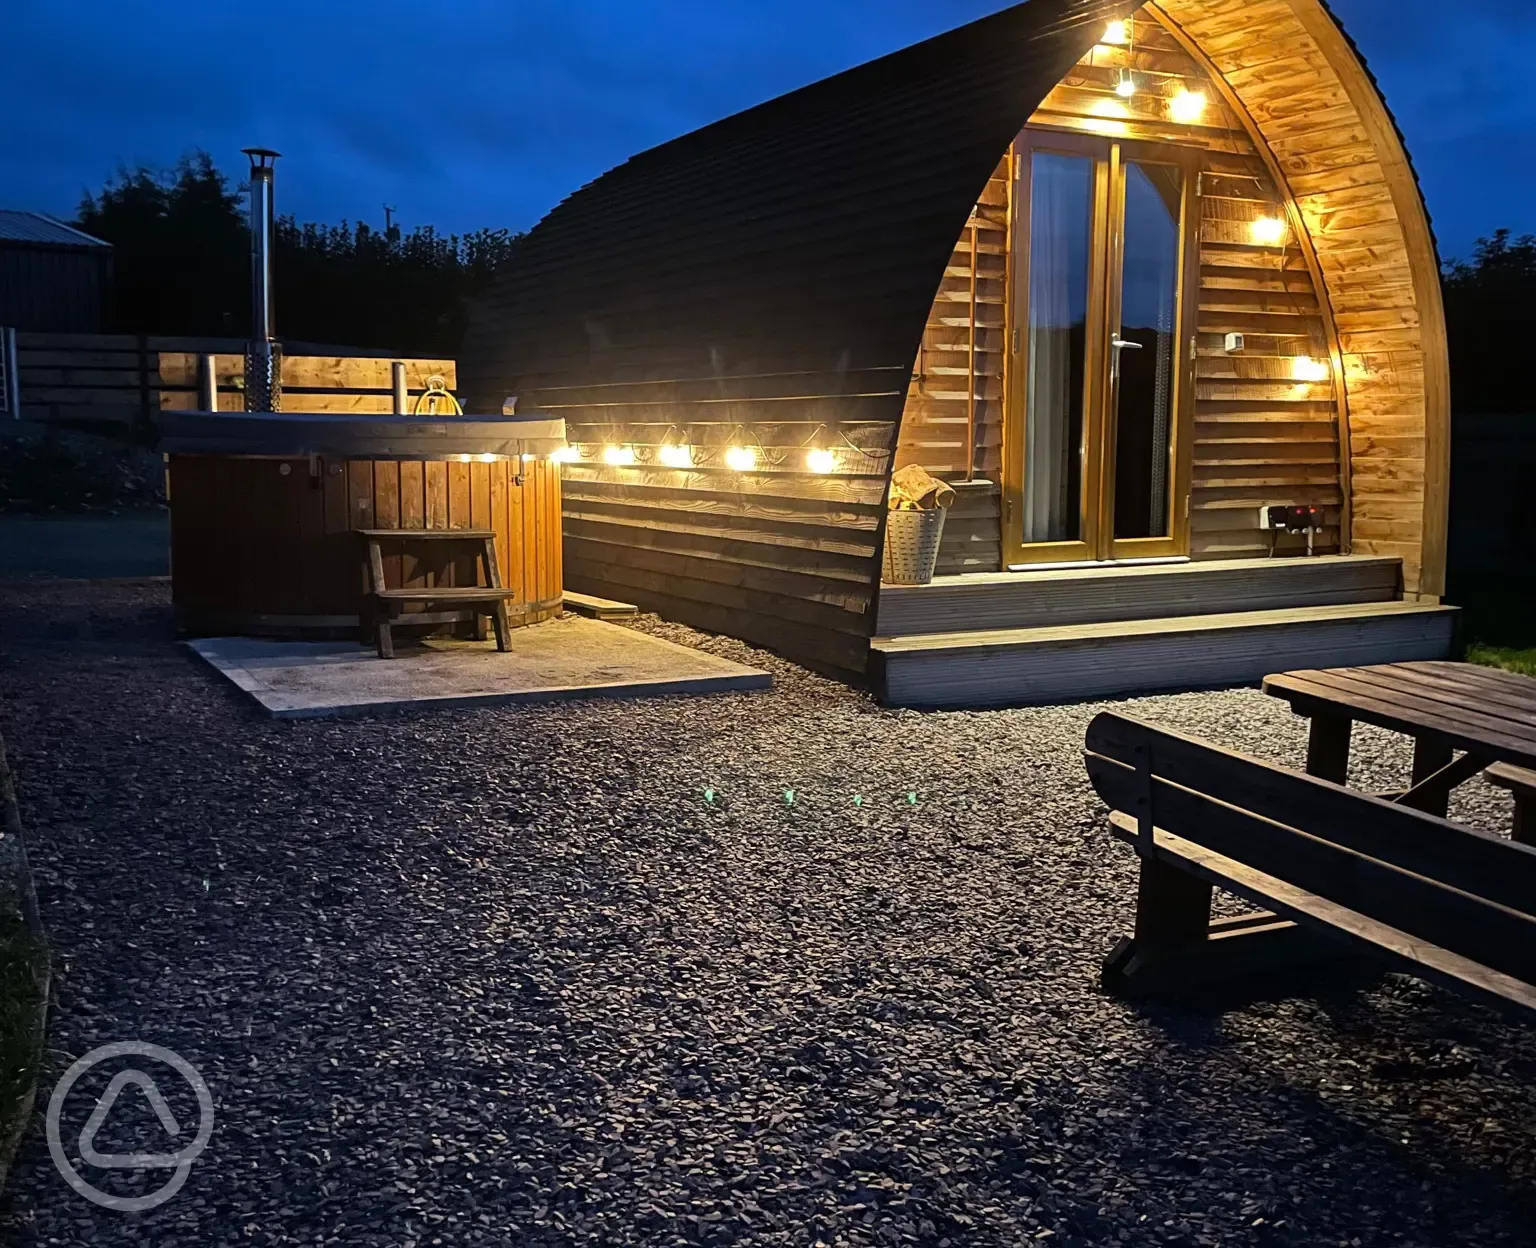 Deluxe Wigwam pod and hot tub at night